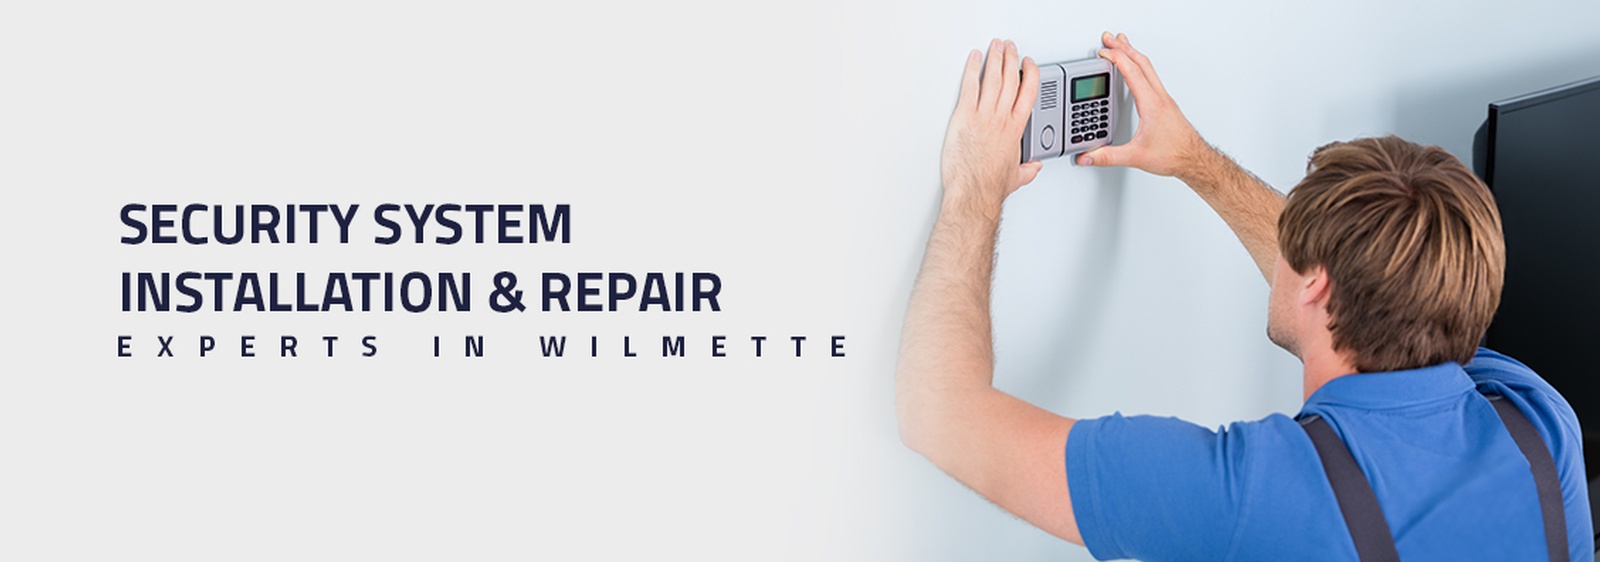 Security System Installation & Repair Experts in Wilmette